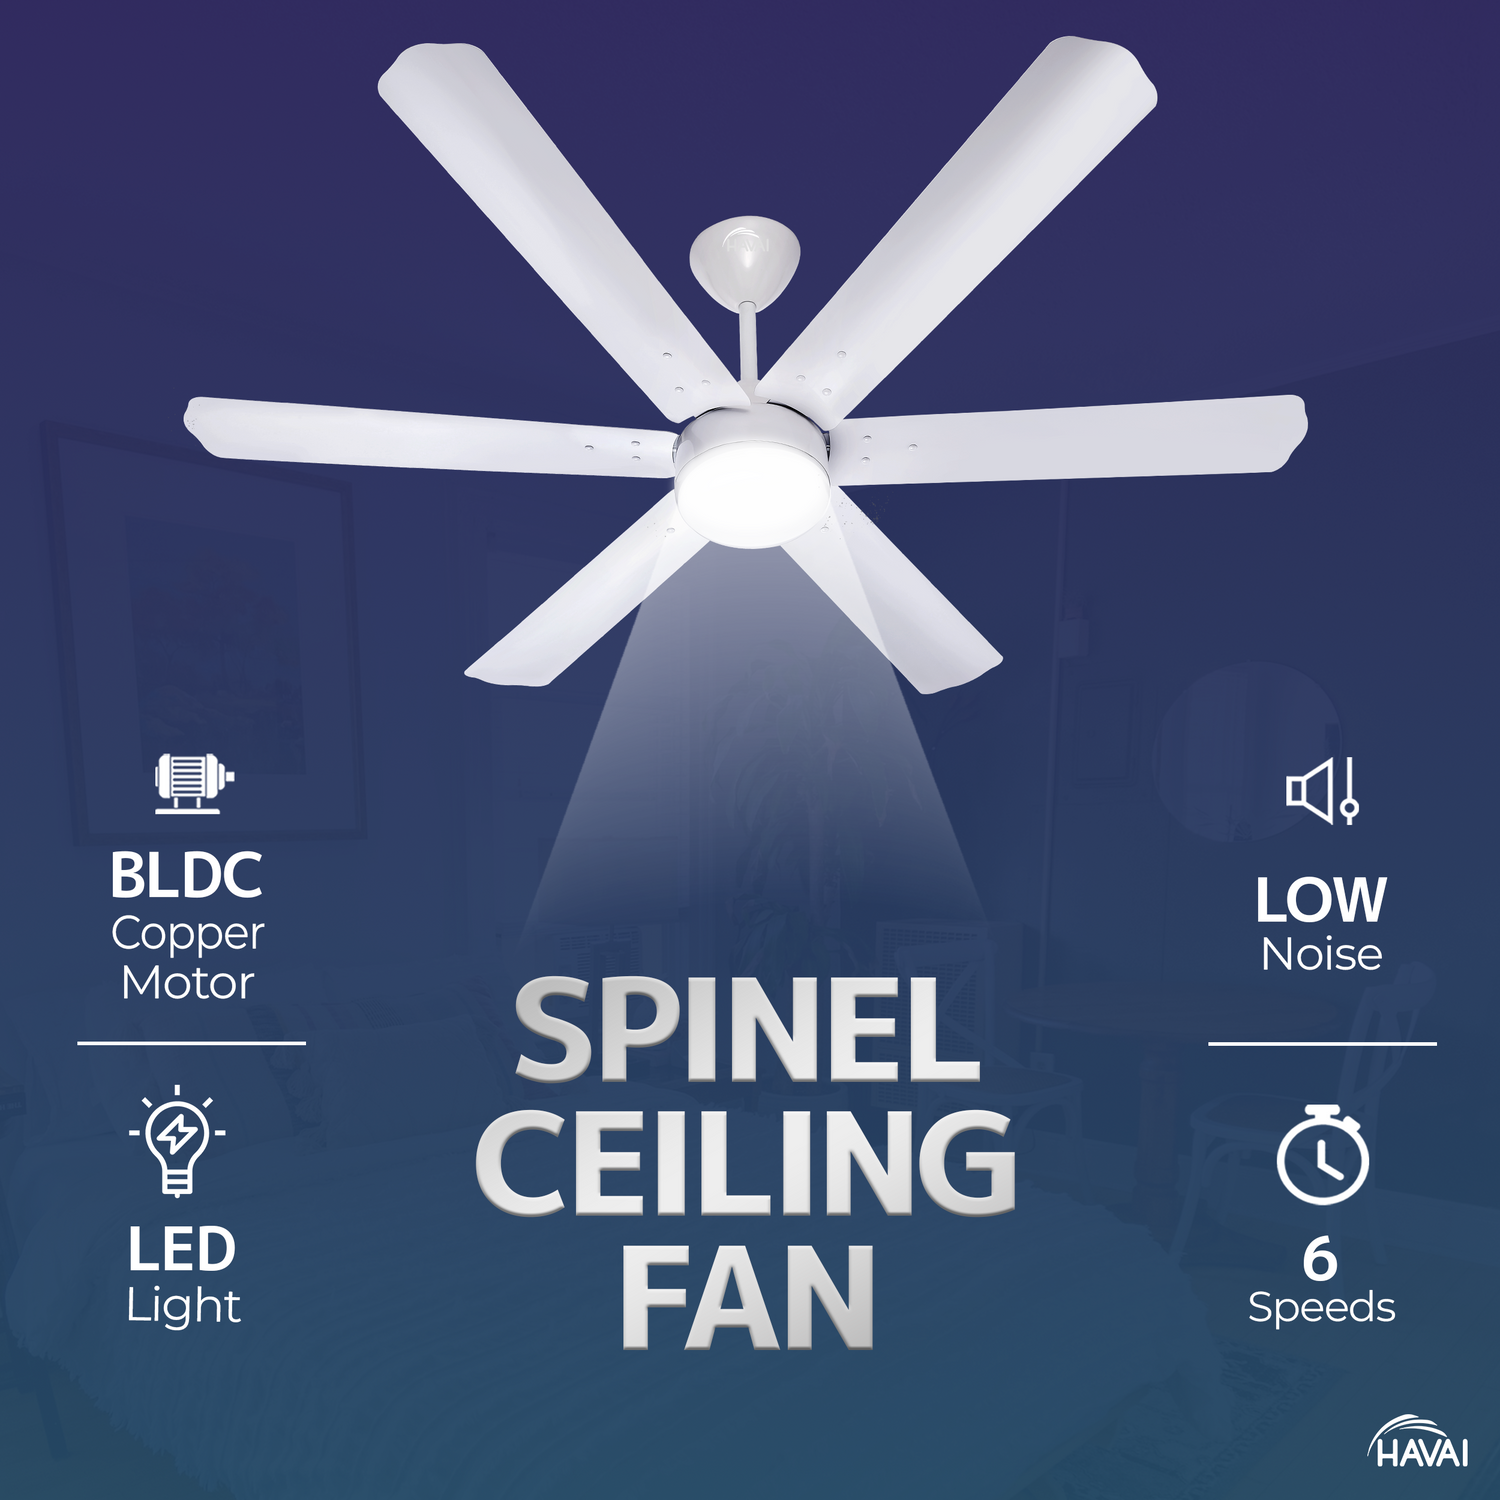 HAVAI Spinel BLDC Ceiling Fan 35W, 1200mm Blade with Remote - Pearl White, 9W LED Light